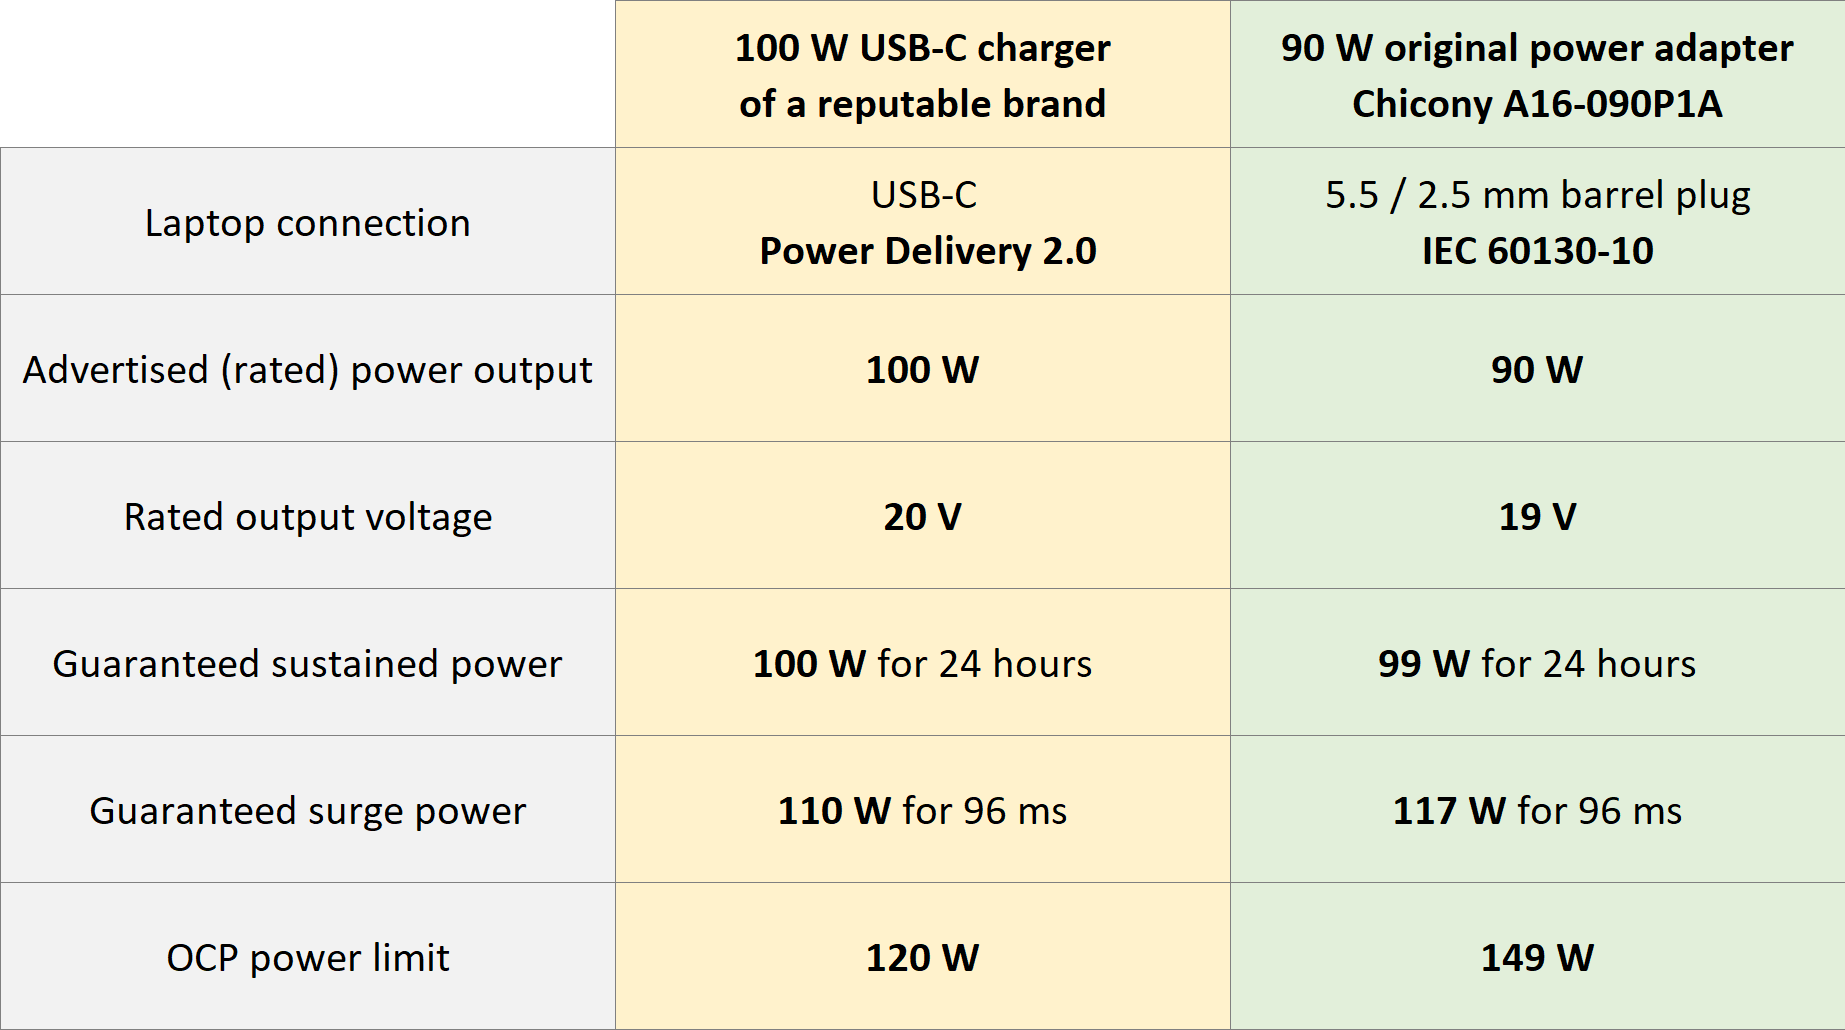 Comparison table with detailed specs of 90W traditional adapter vs. 100W USB-C charger